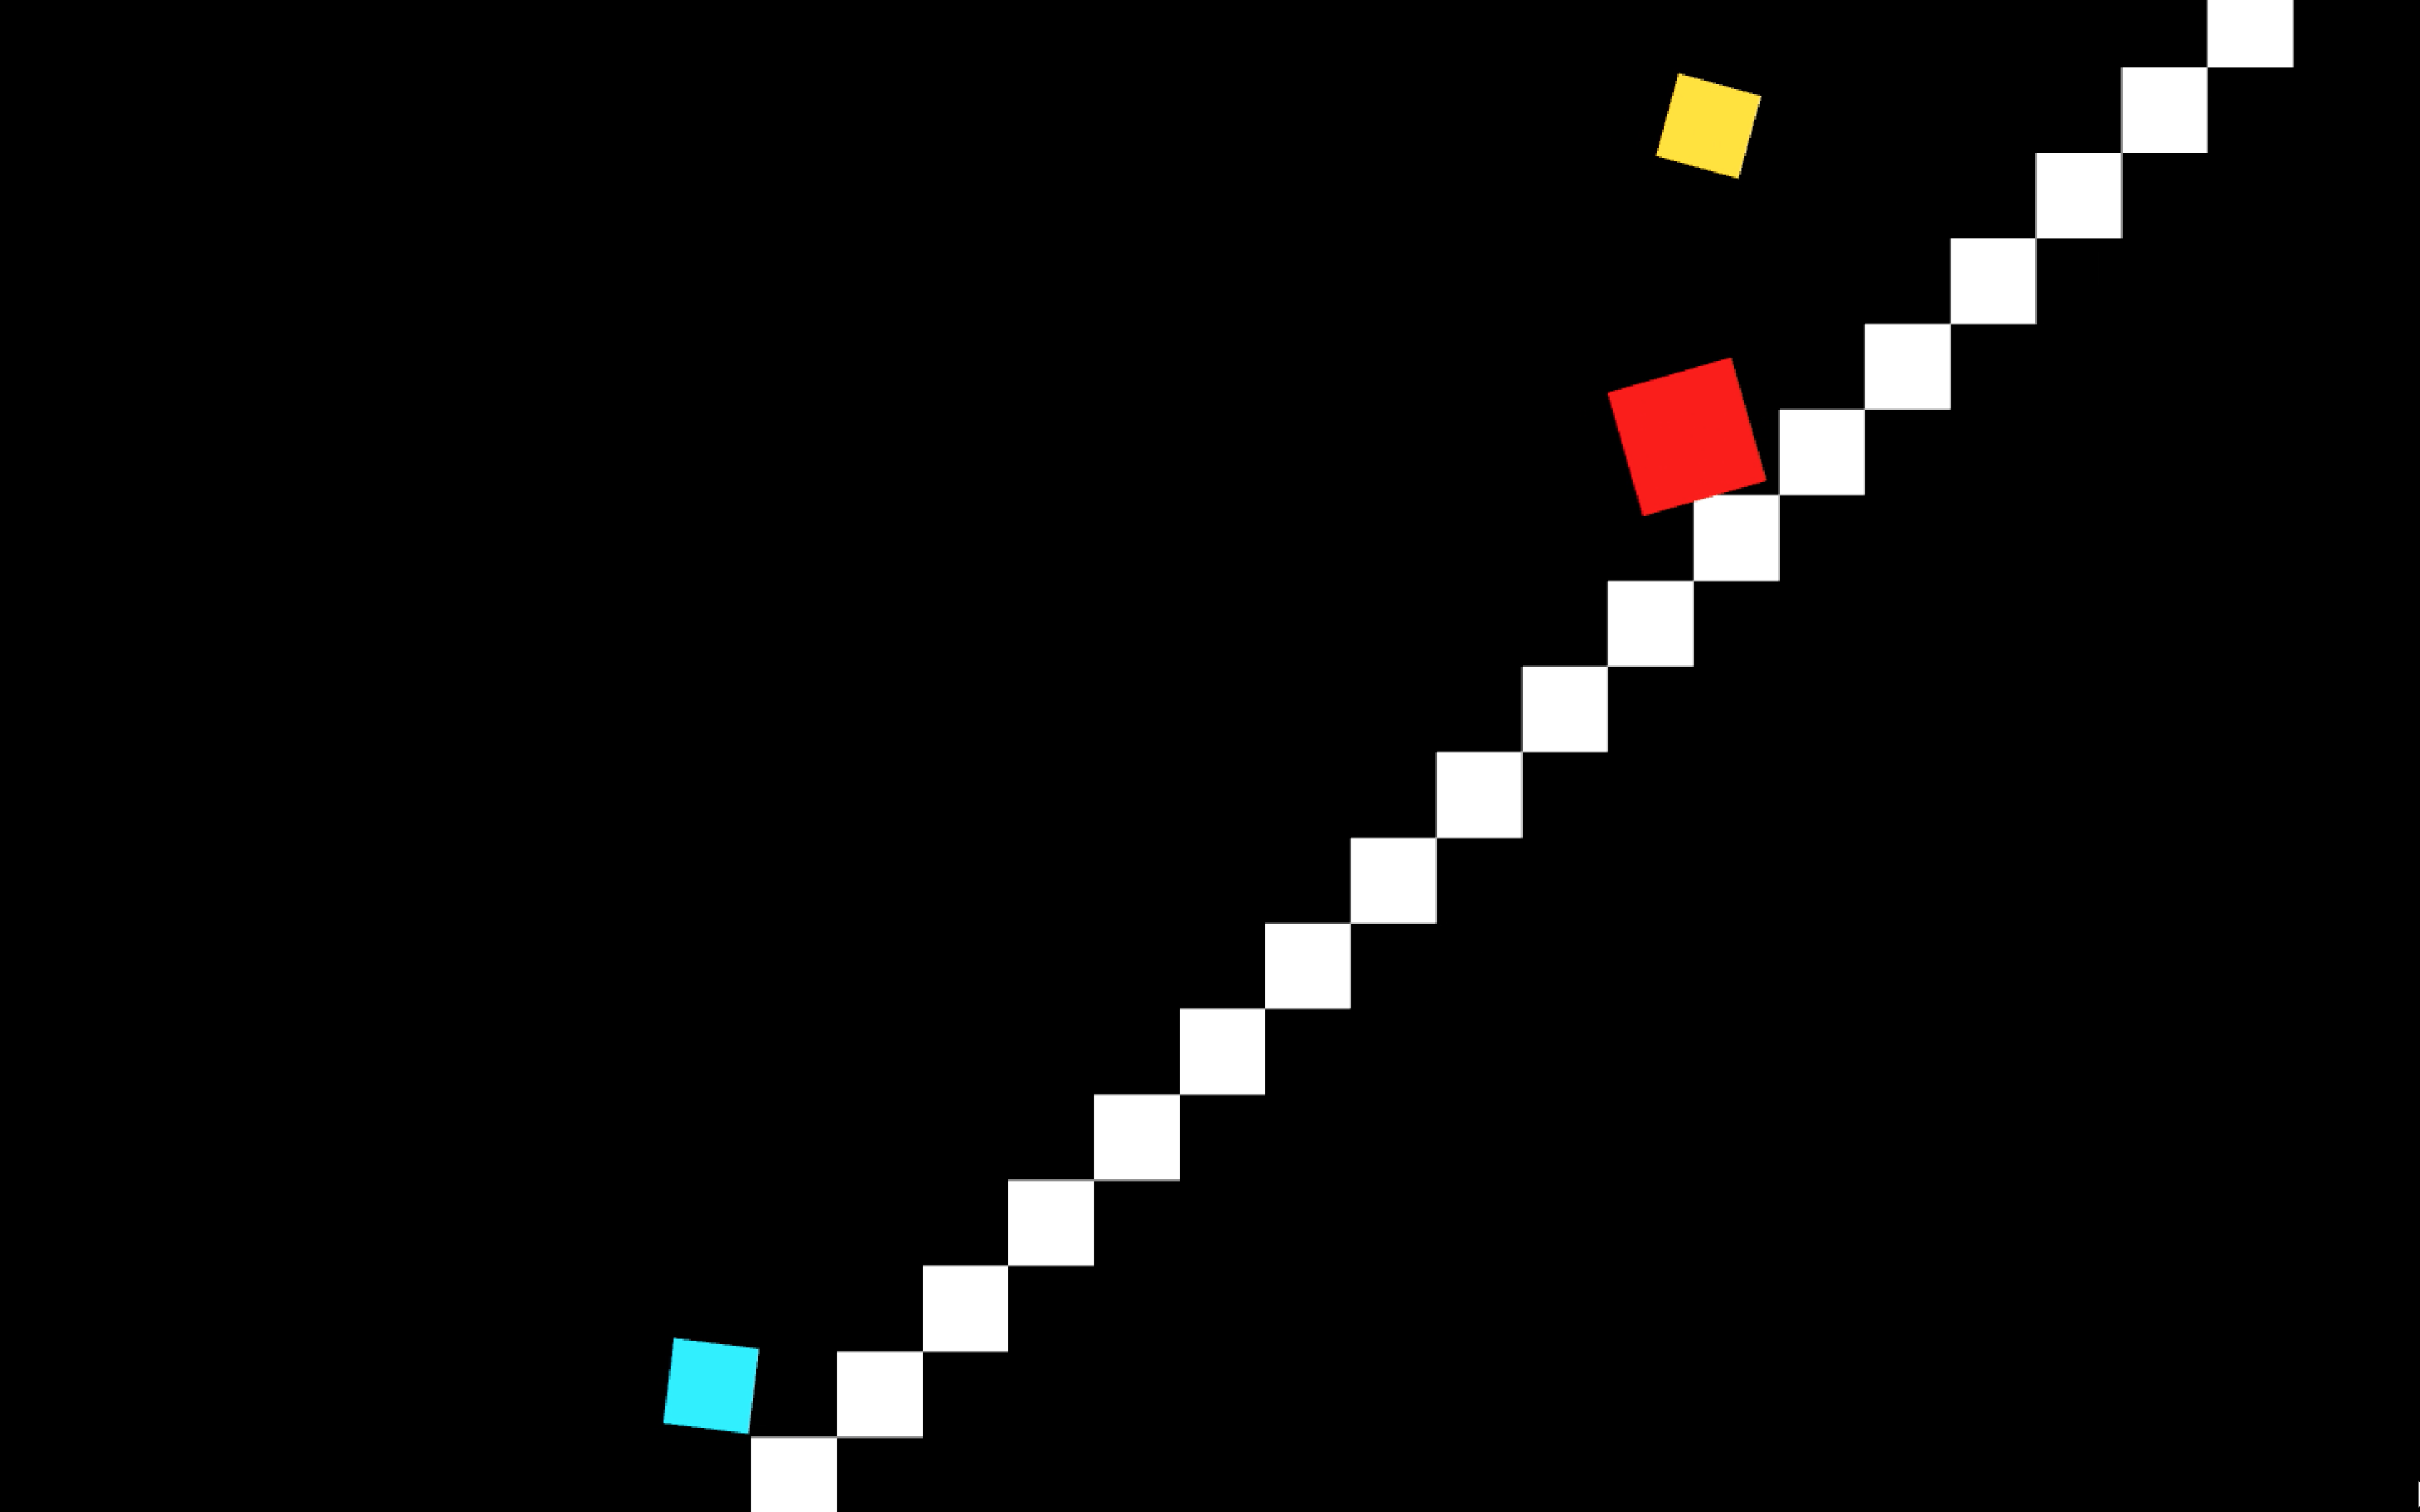 Stair Brawl is a two-player arcade game where two sides try to reach the top of the stairs while knocking each other back with falling objects.